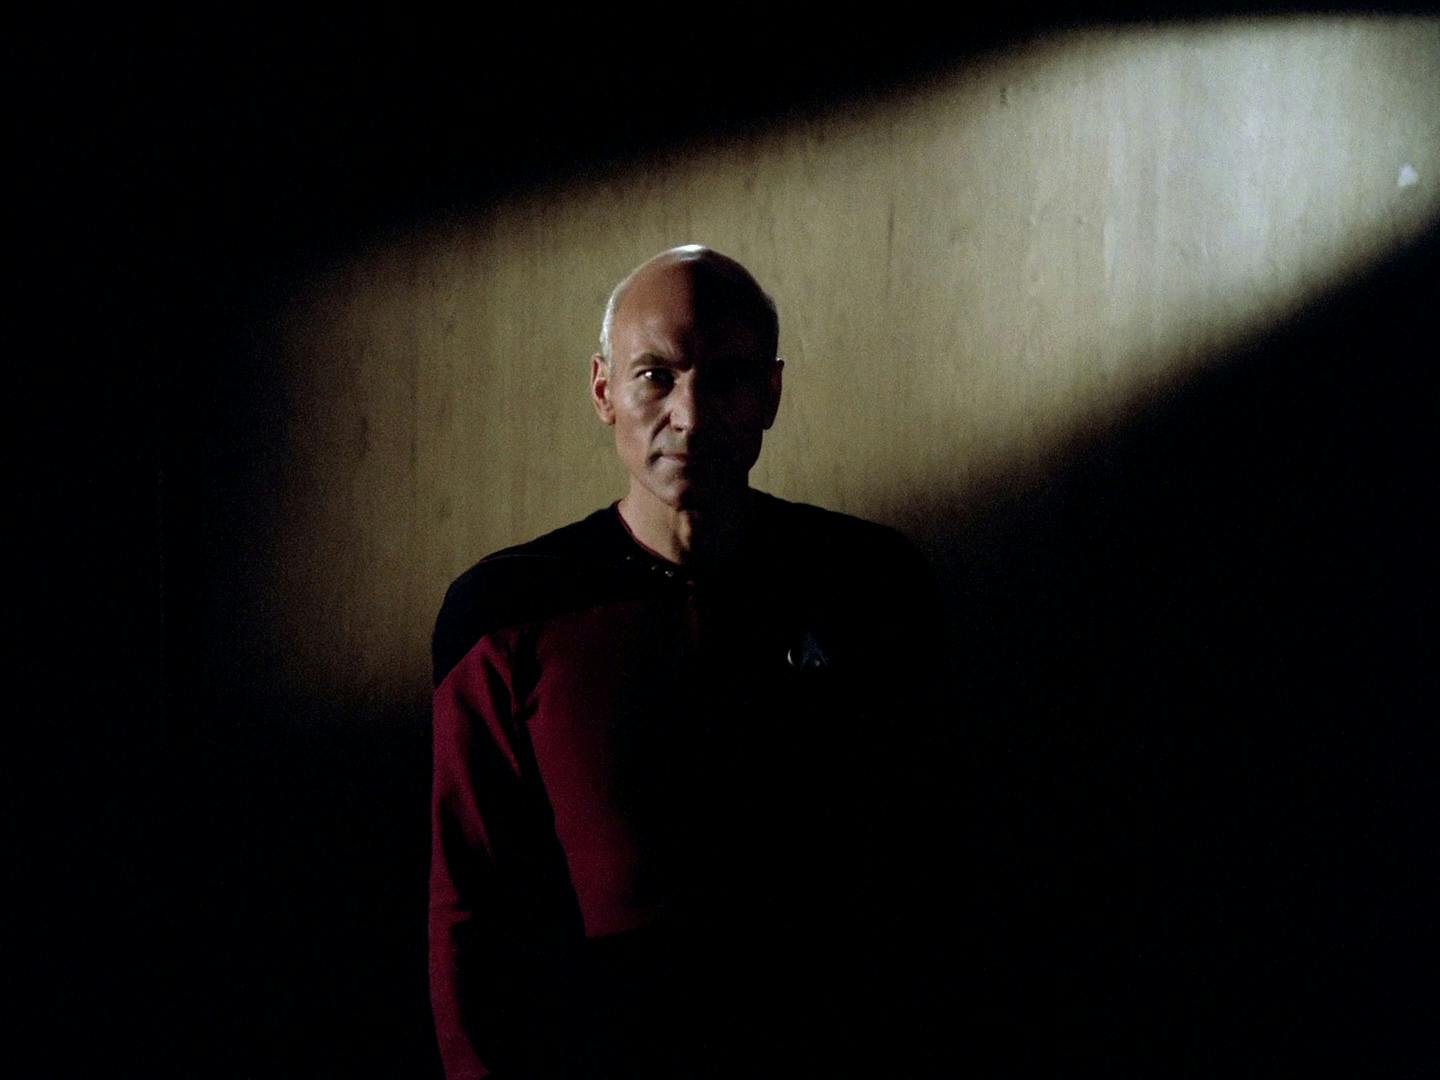 Emerging from the shadows, Captain Picard looks out at the 'great, unexplored mass of the galaxy' in the opening of 'Encounter at Farpoint'